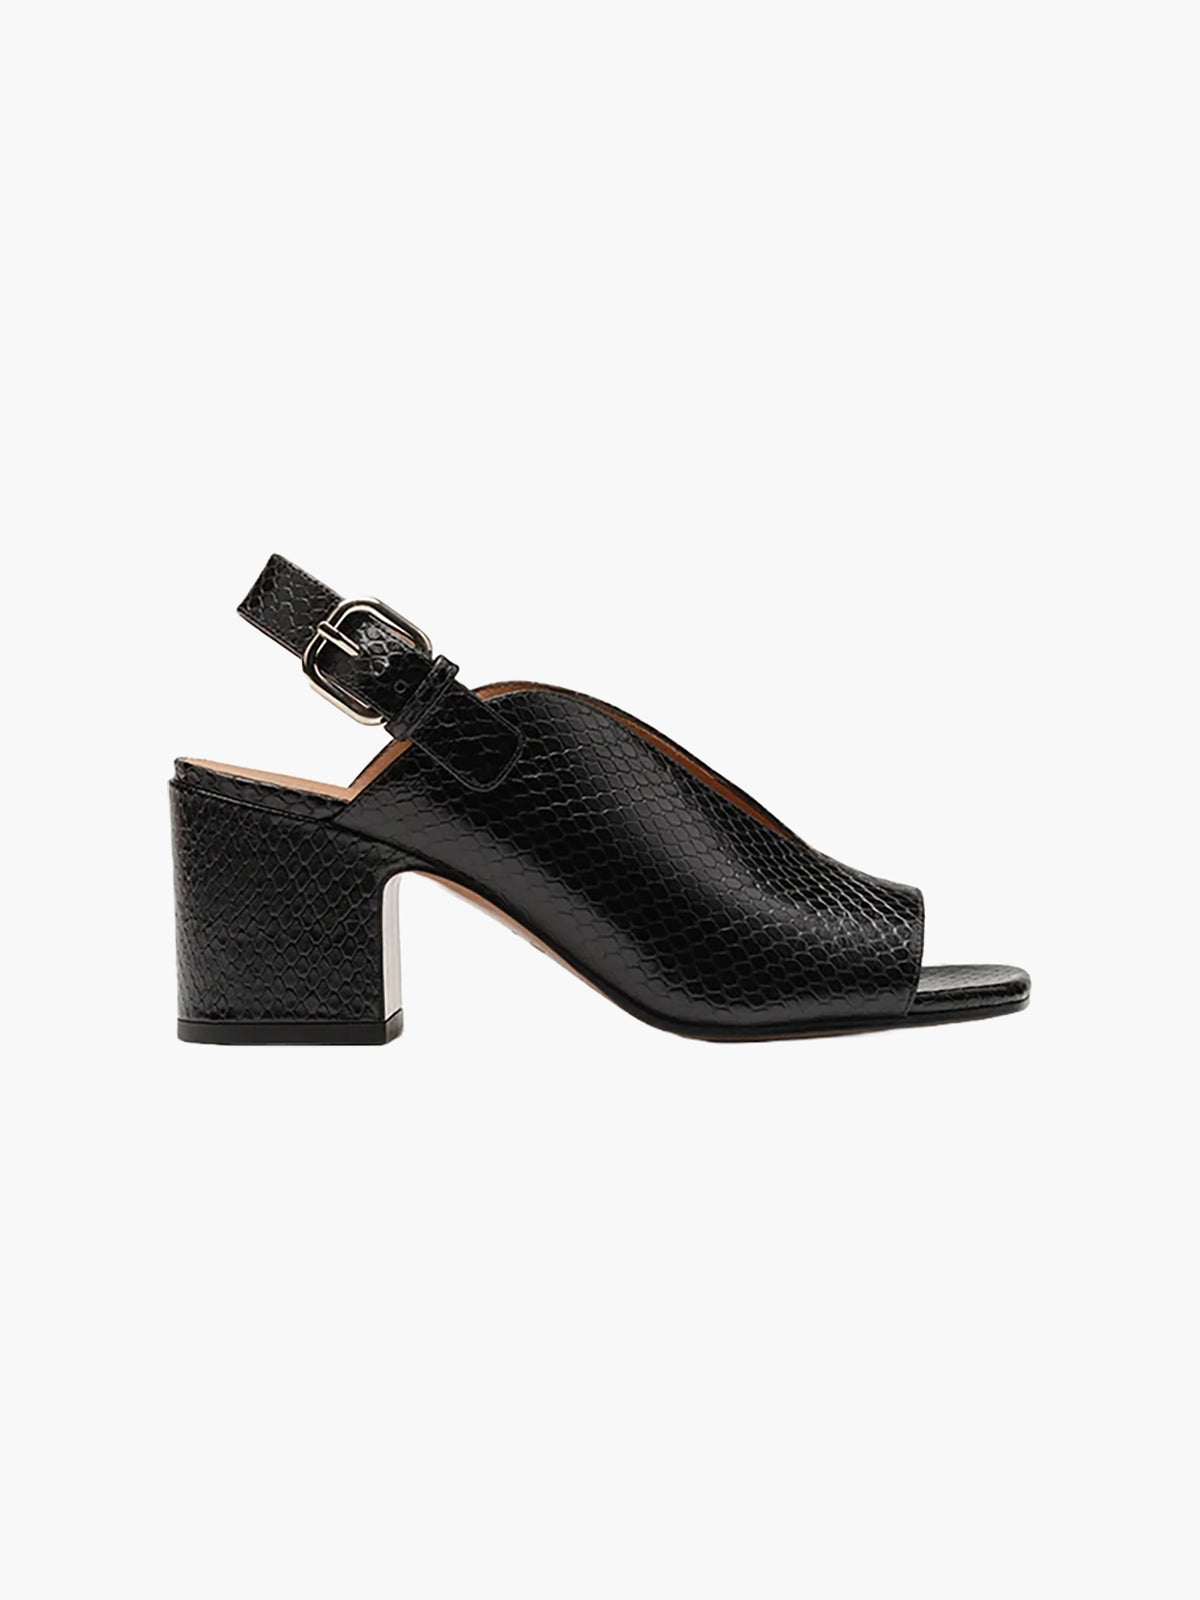 Baghera Sandals | Smooth Leather Black